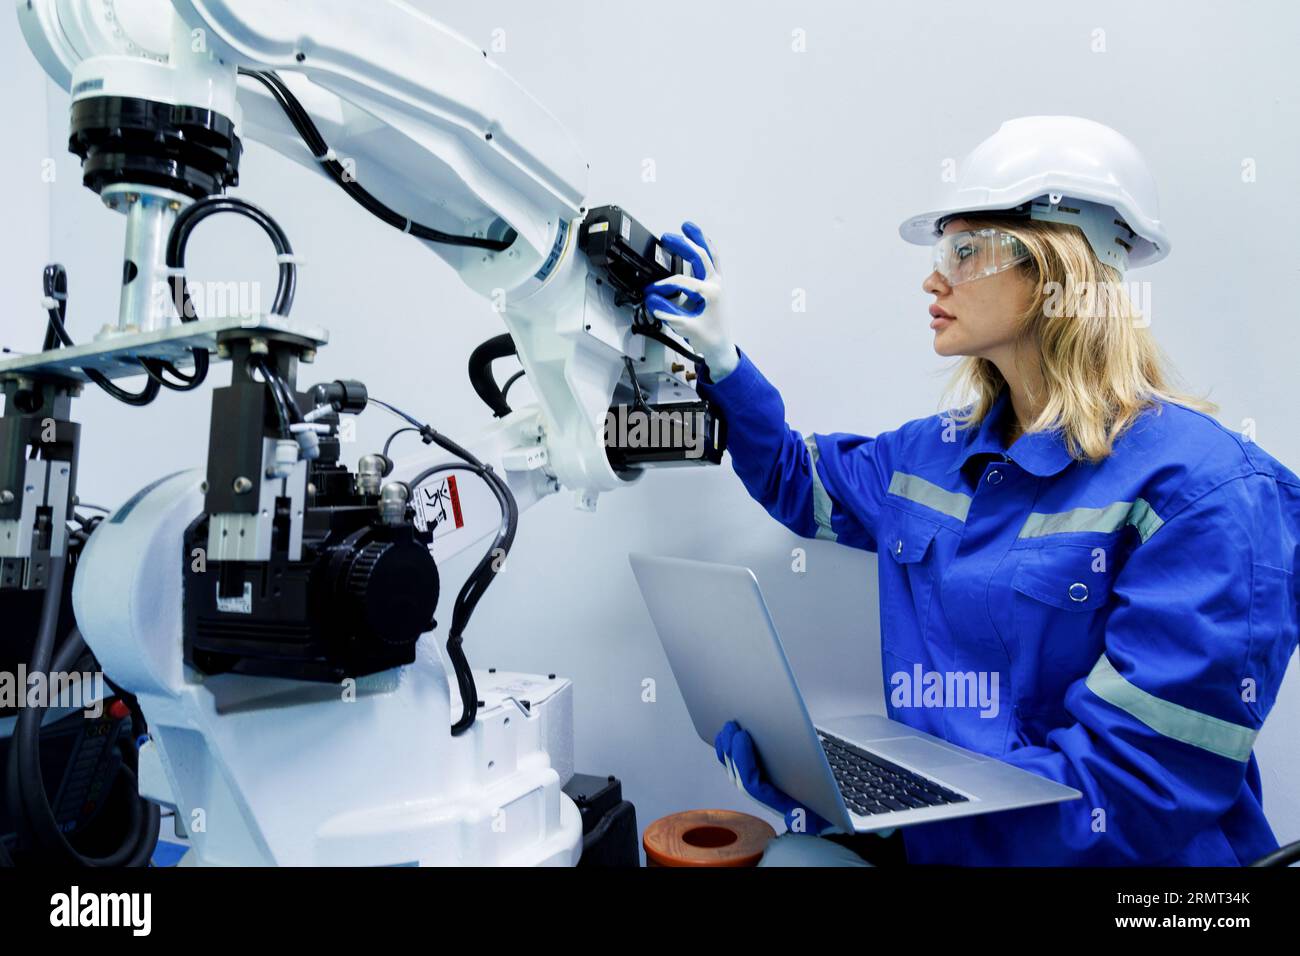 female automation machine engineer student study and inspection control robot arm machine in university or factory workshop. ai robot technology new i Stock Photo